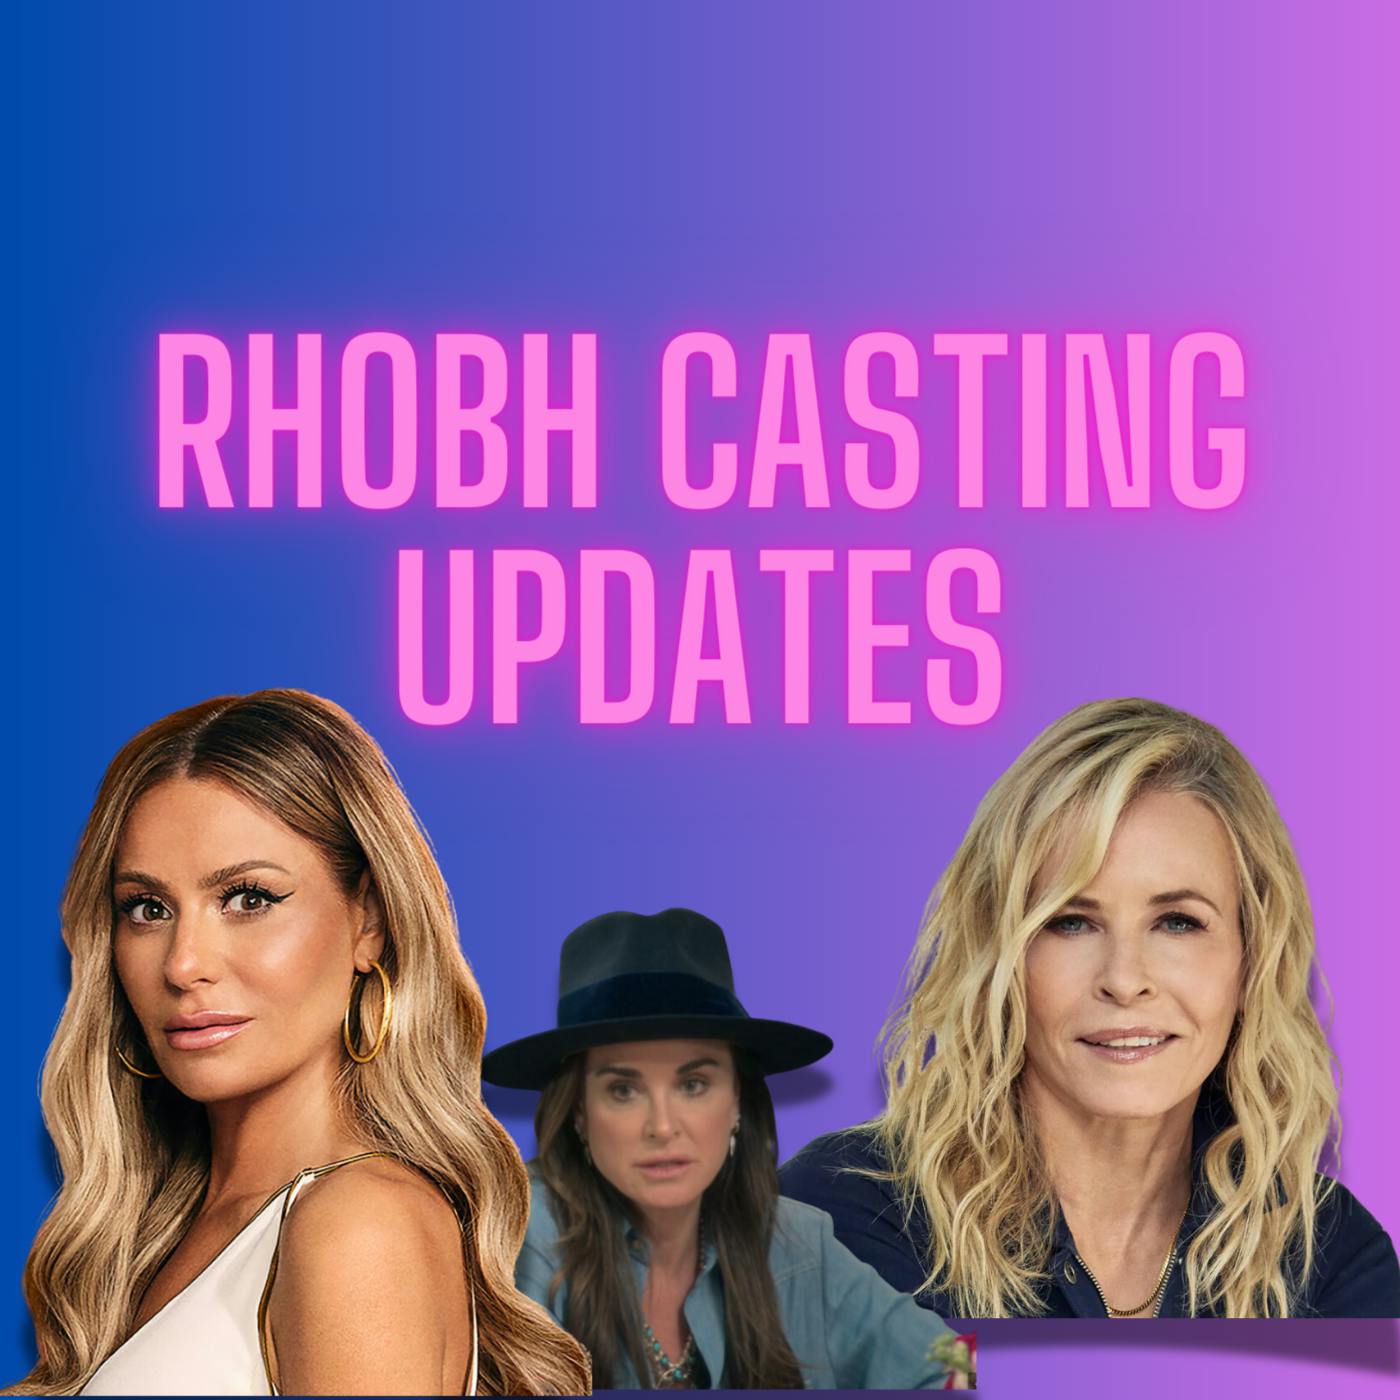 RHOBH Casting Updates, Jax & Brittany Go to DC, Monica Garcia Suffers a Miscarriage and More